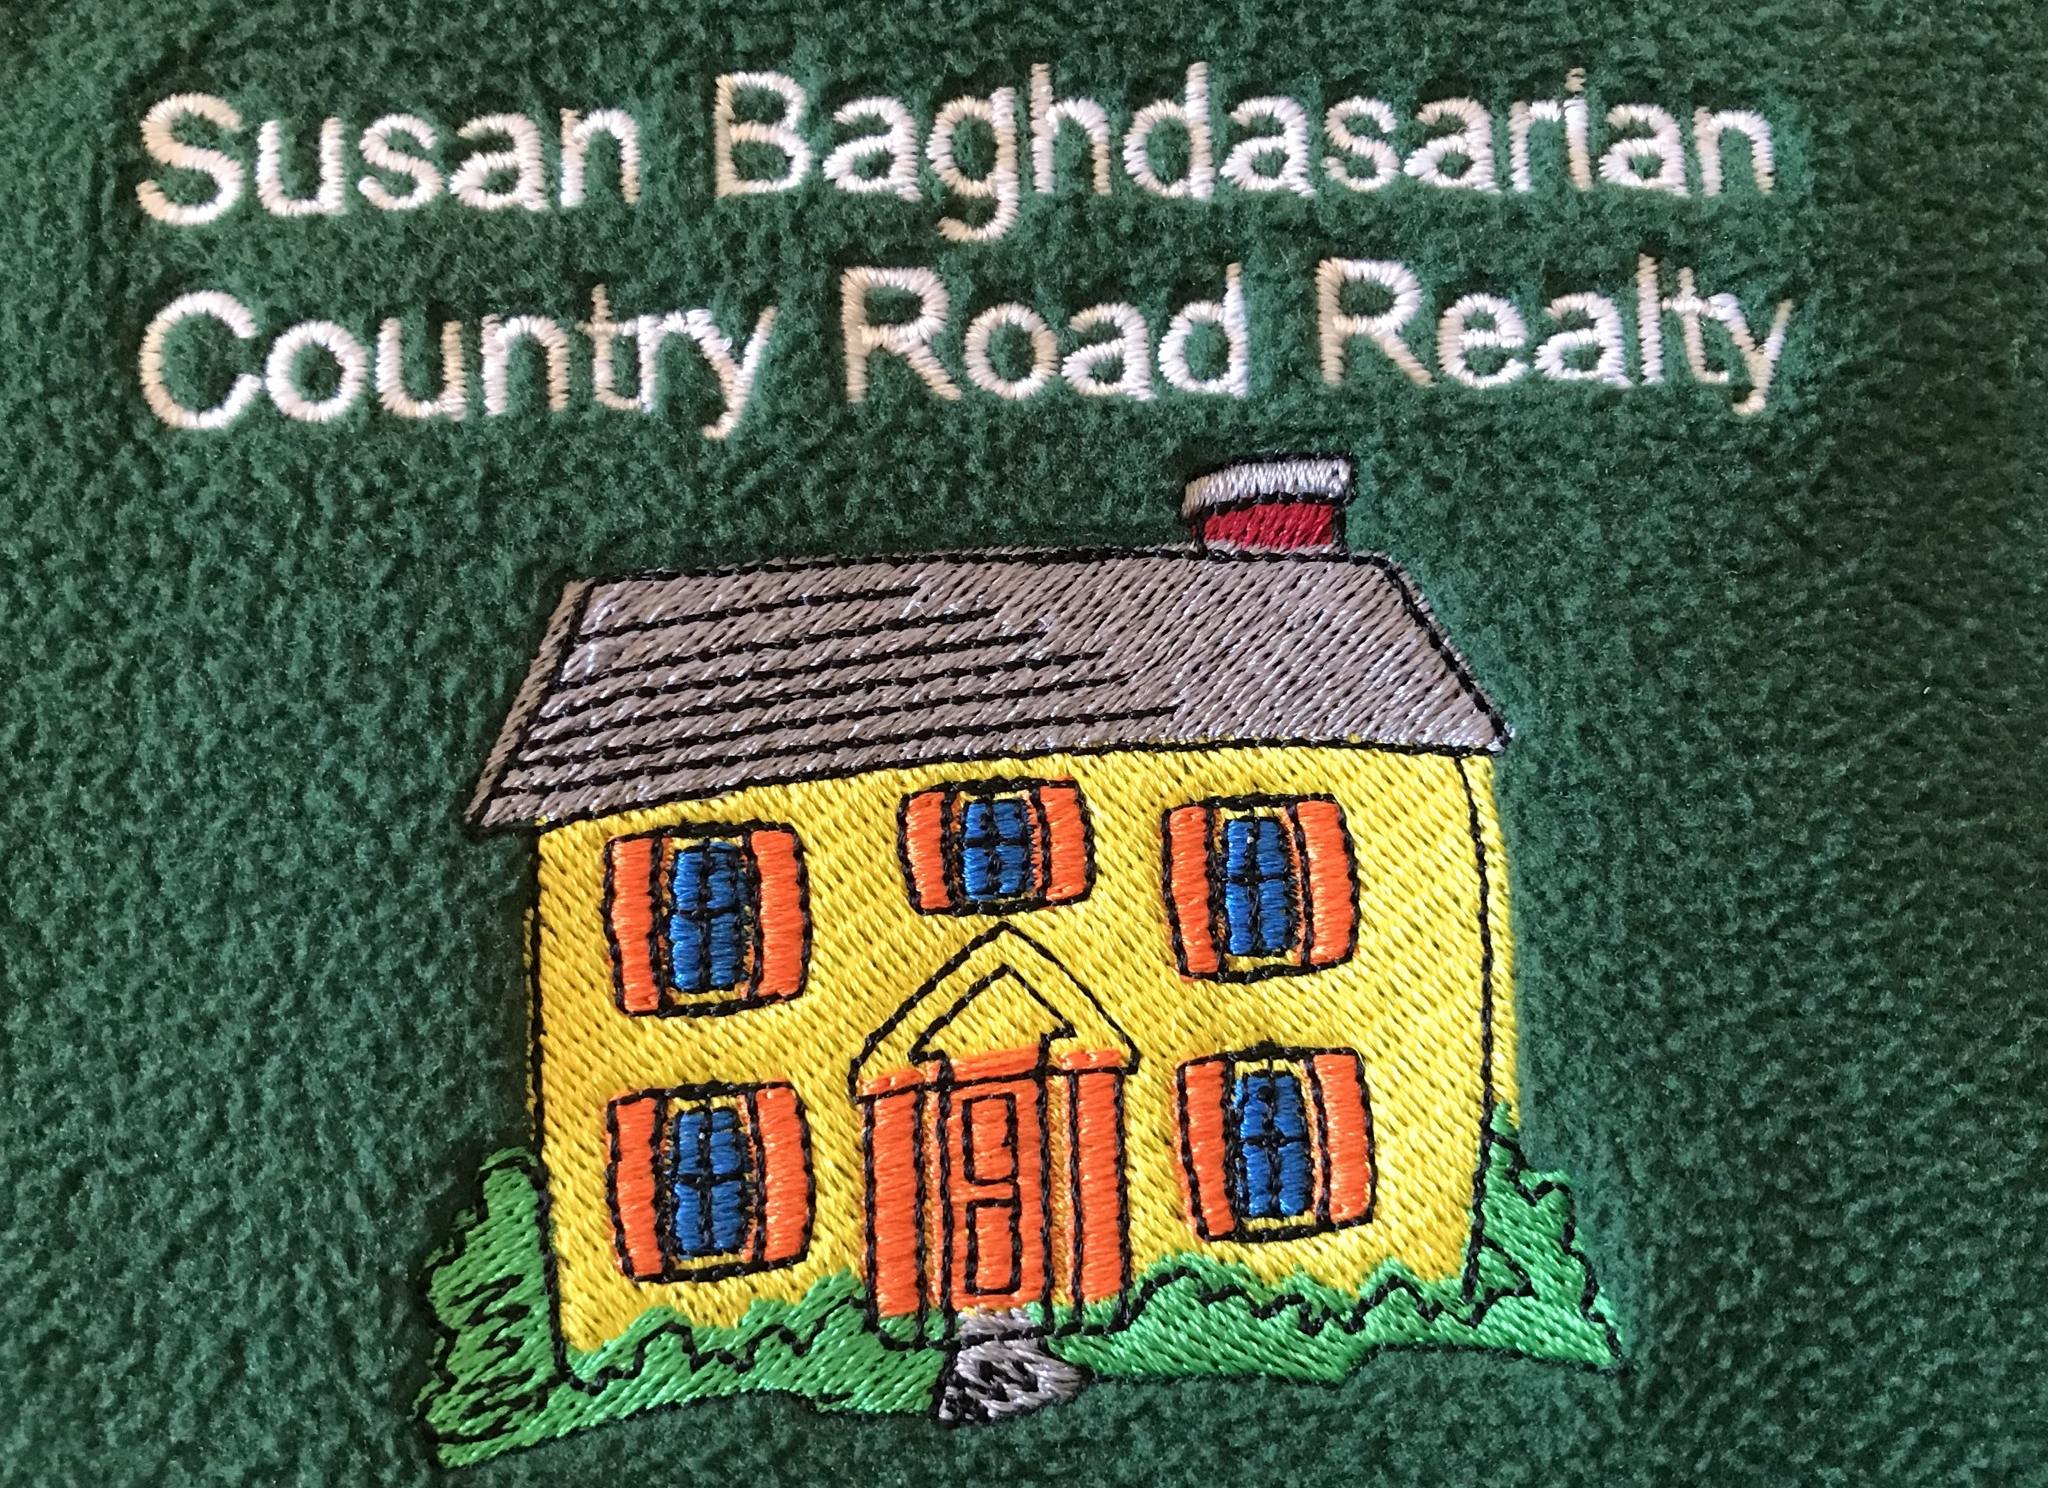 Country Road Realty